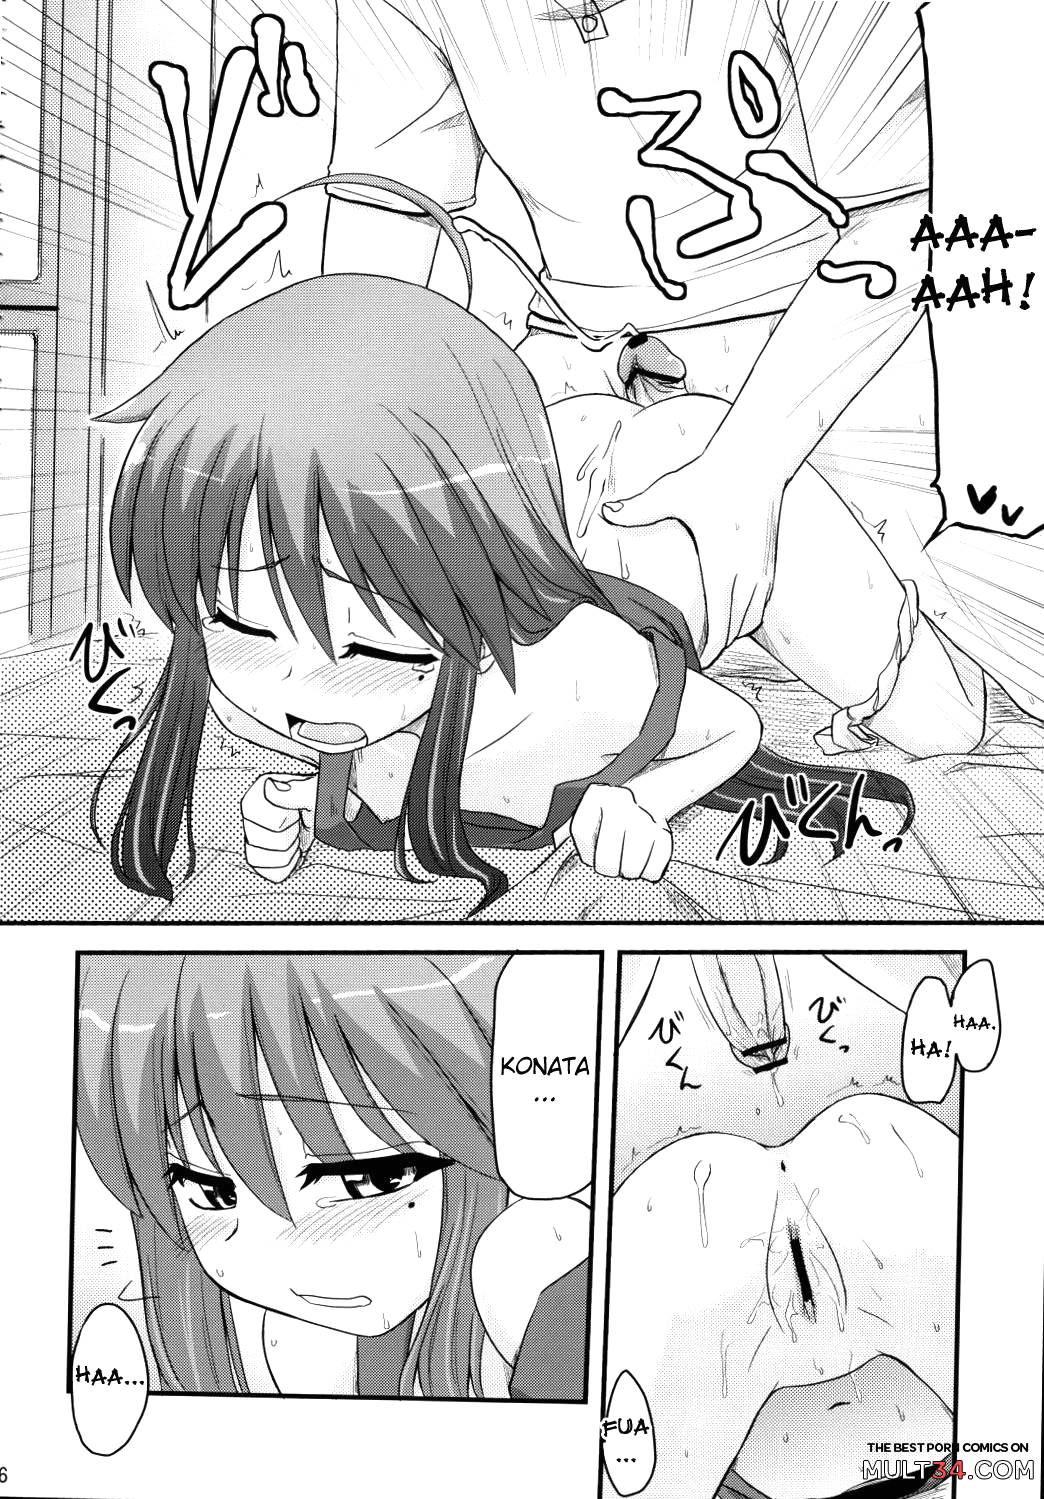 Konata and Oh-zu 4 people each and every one + 1 page 52